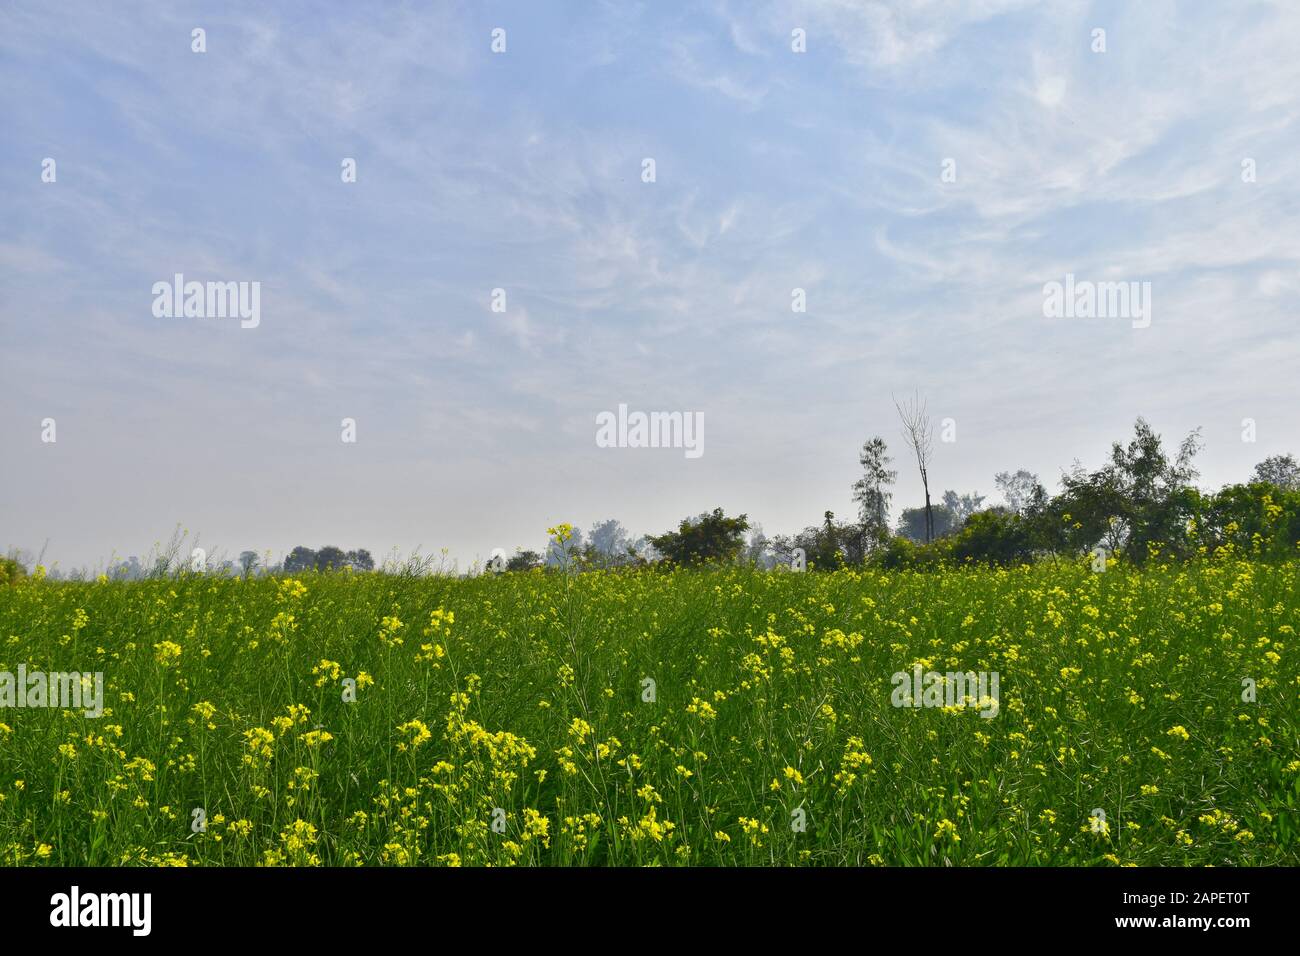 The mustard is a plant species in the genera Brassica. The group of little blurred yellow flowers of mustard with cloudy sky. Stock Photo